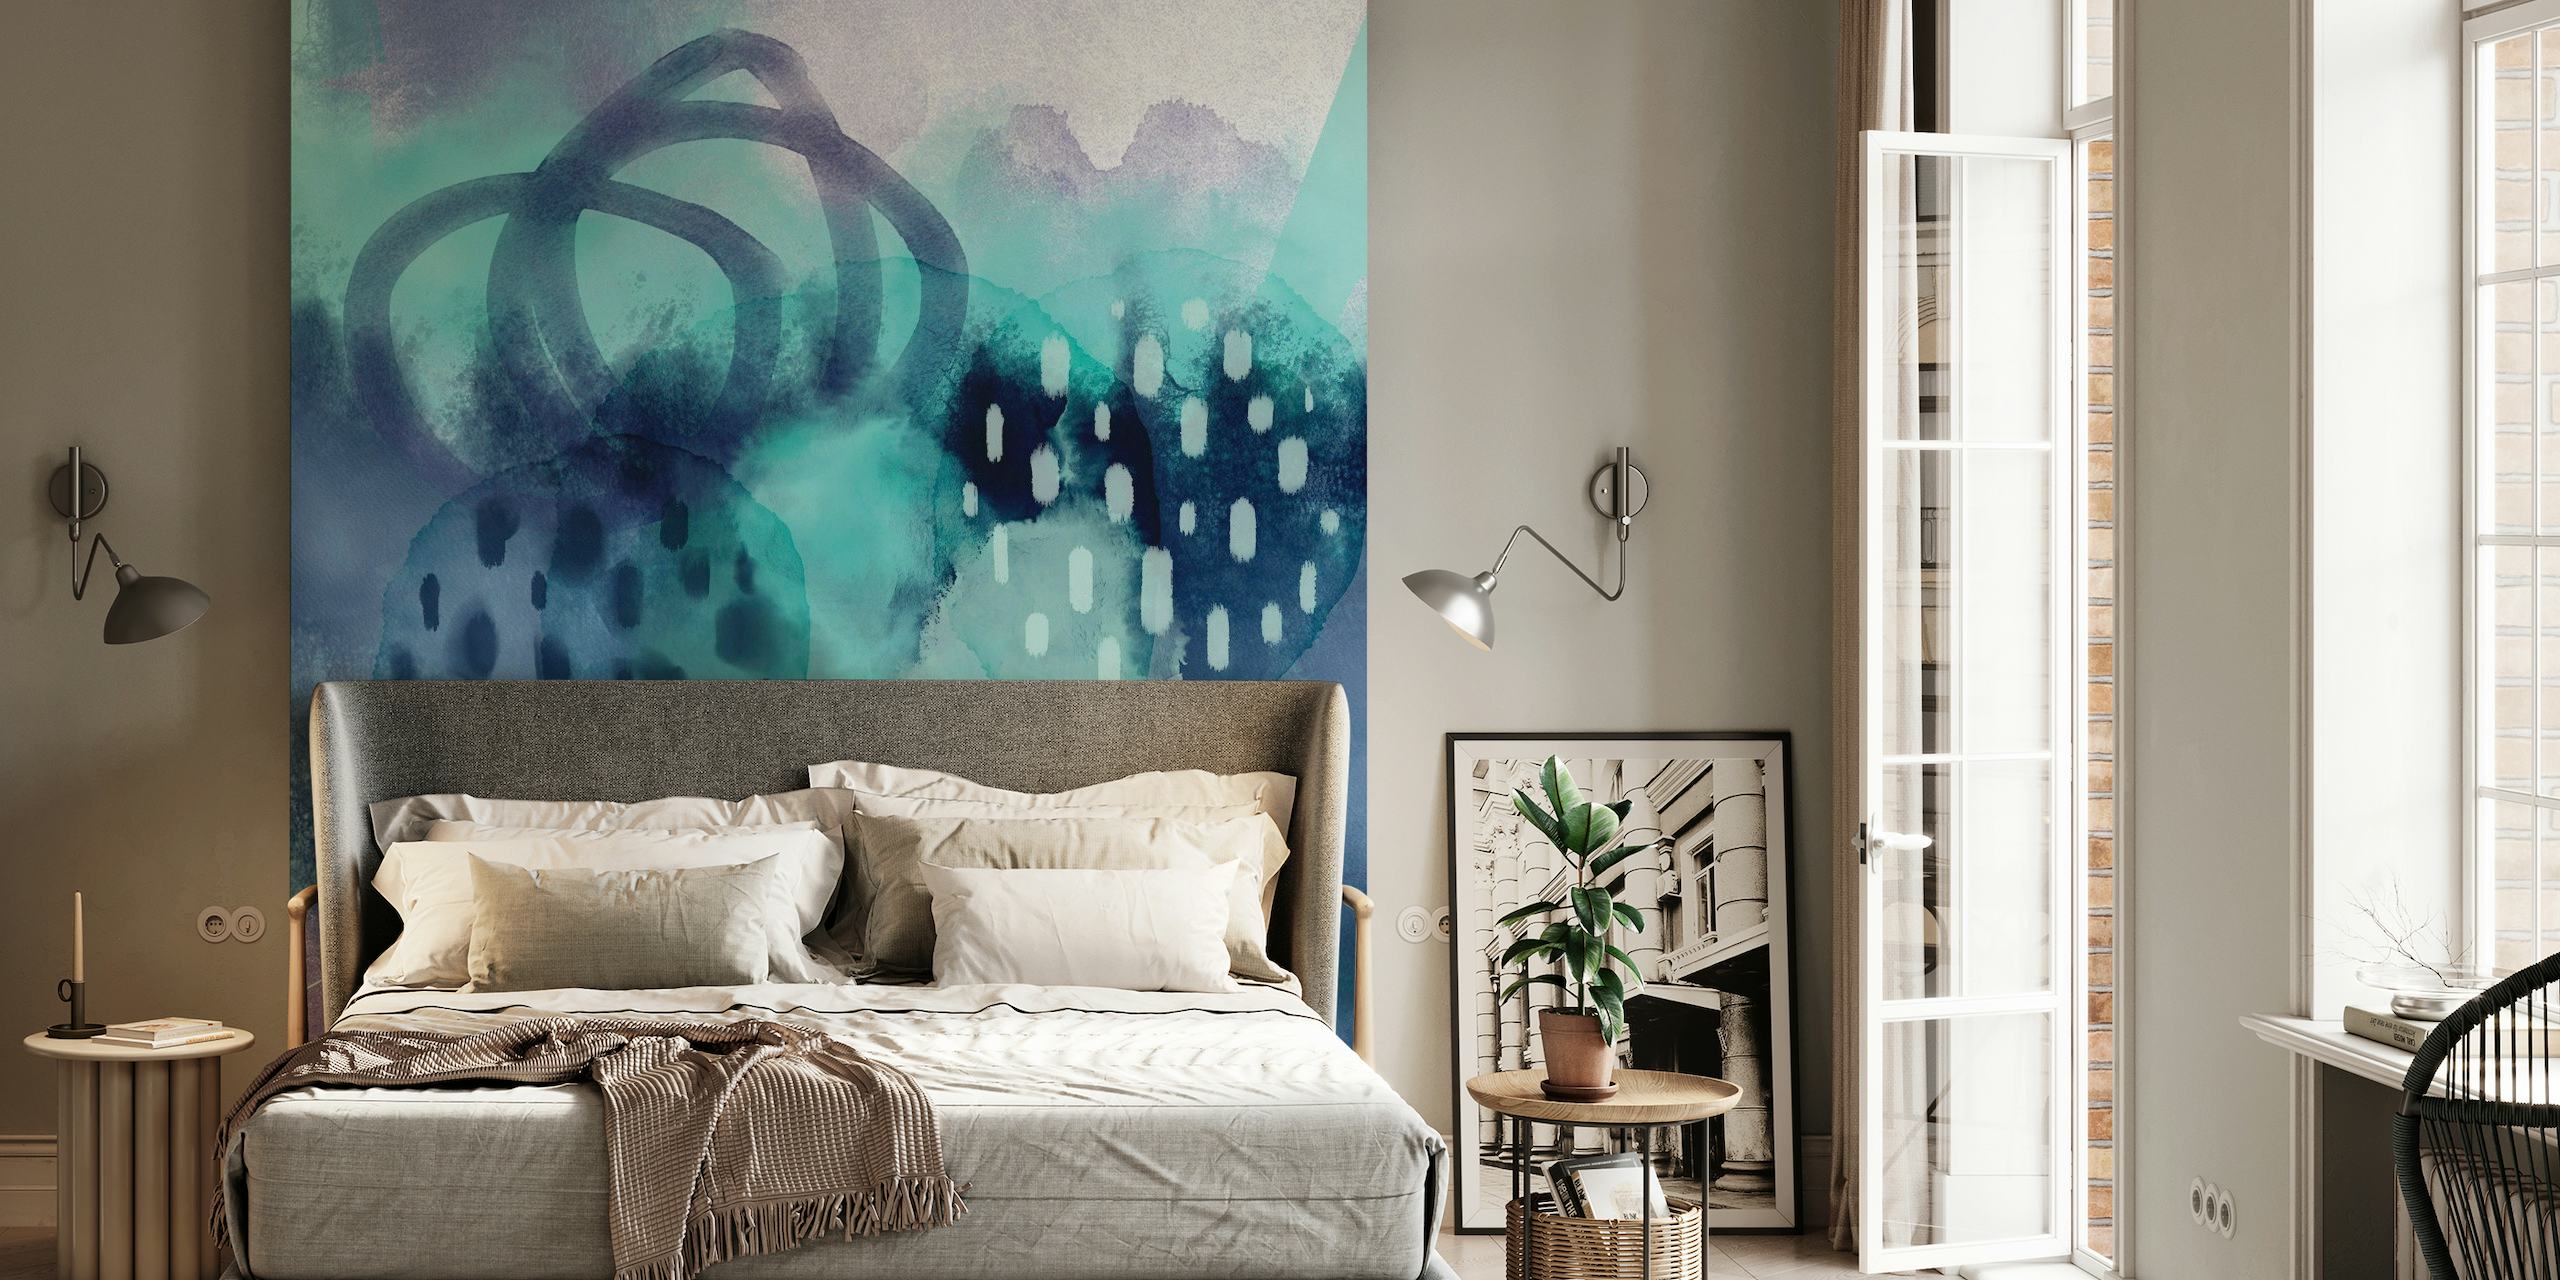 Abstract aqua blue watercolor wall mural with ethereal textures and brush strokes